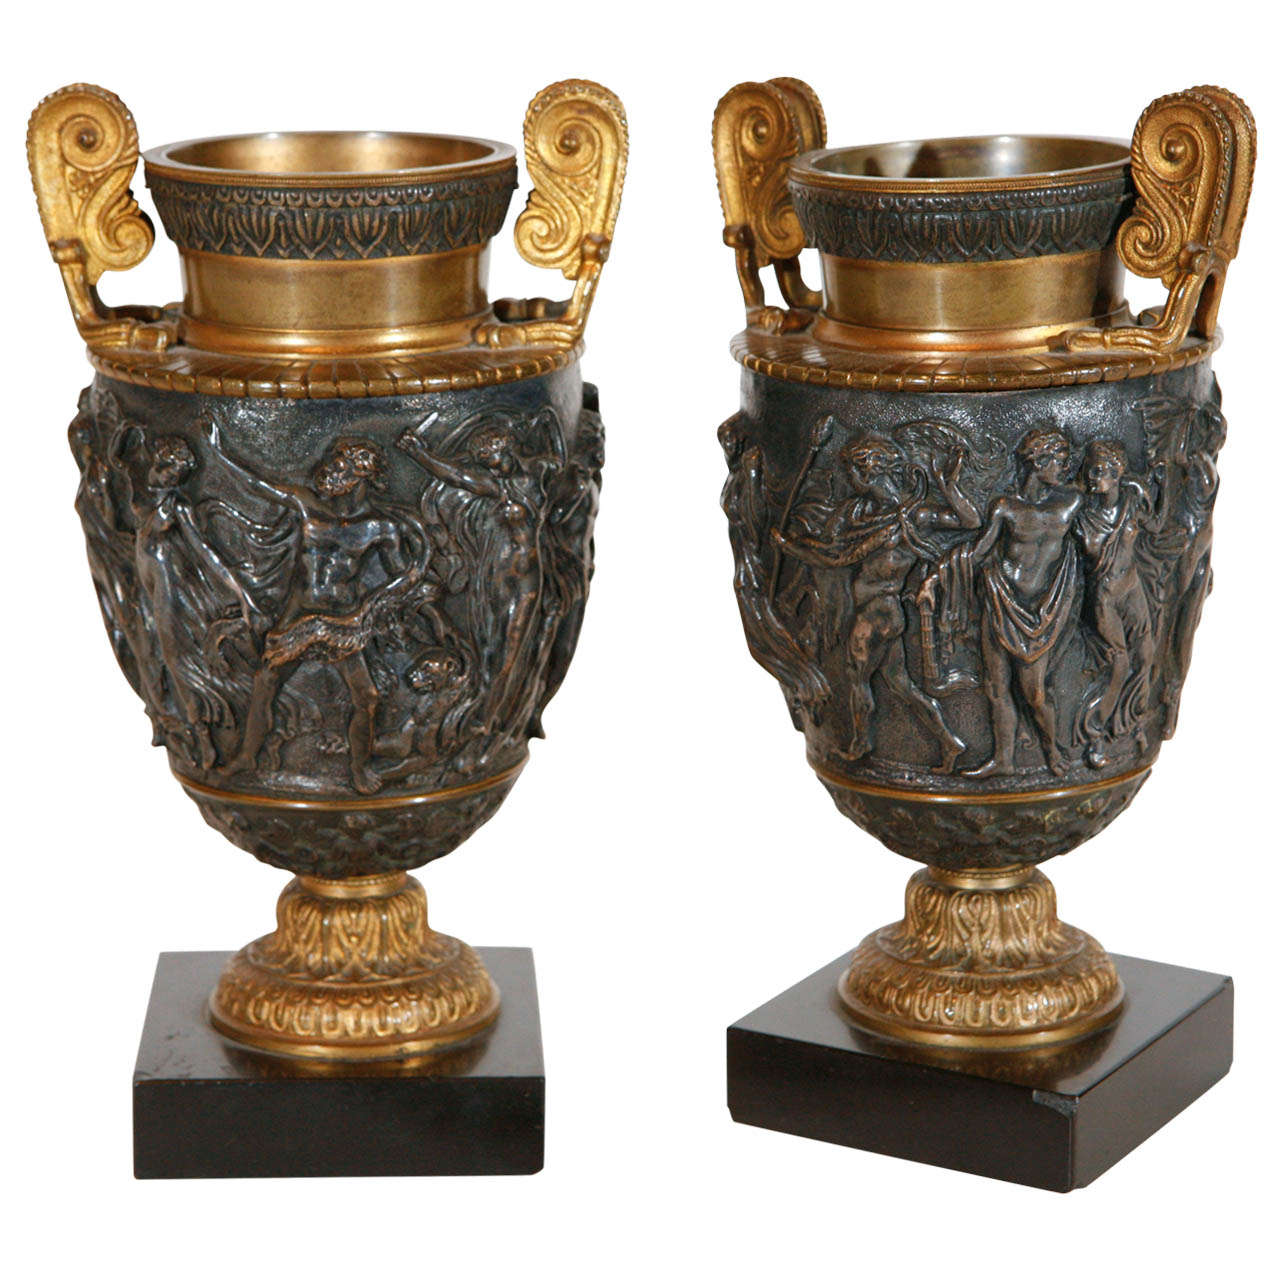 Turn of the Century Silver and Bronze Urns